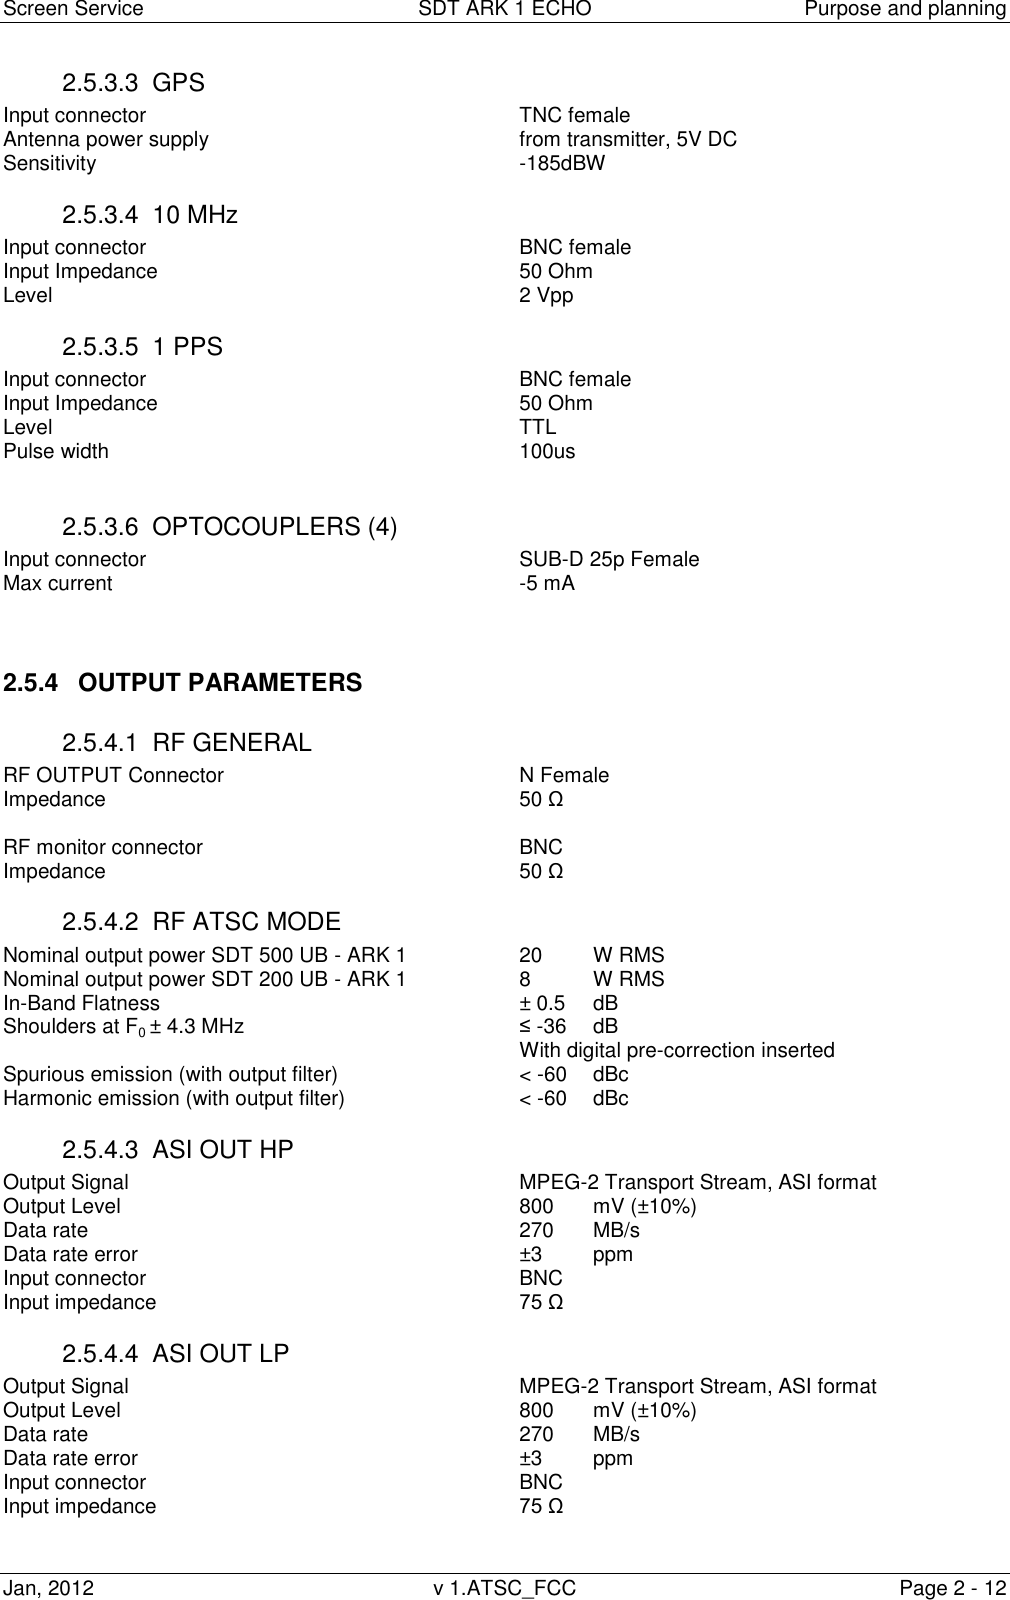 Screen Service  SDT ARK 1 ECHO  Purpose and planning Jan, 2012  v 1.ATSC_FCC  Page 2 - 12 2.5.3.3  GPS Input connector           TNC female Antenna power supply          from transmitter, 5V DC Sensitivity            -185dBW 2.5.3.4  10 MHz Input connector           BNC female Input Impedance          50 Ohm Level               2 Vpp 2.5.3.5  1 PPS Input connector           BNC female Input Impedance          50 Ohm Level               TTL Pulse width            100us  2.5.3.6  OPTOCOUPLERS (4) Input connector           SUB-D 25p Female Max current            -5 mA   2.5.4  OUTPUT PARAMETERS 2.5.4.1  RF GENERAL RF OUTPUT Connector        N Female       Impedance            50 Ω  RF monitor connector          BNC Impedance            50 Ω 2.5.4.2  RF ATSC MODE Nominal output power SDT 500 UB - ARK 1    20 W RMS Nominal output power SDT 200 UB - ARK 1    8   W RMS In-Band Flatness          ± 0.5  dB Shoulders at F0 ± 4.3 MHz        ≤ -36  dB               With digital pre-correction inserted Spurious emission (with output filter)      &lt; -60   dBc Harmonic emission (with output filter)      &lt; -60   dBc 2.5.4.3  ASI OUT HP   Output Signal            MPEG-2 Transport Stream, ASI format Output Level            800   mV (±10%) Data rate            270   MB/s Data rate error            ±3 ppm Input connector           BNC Input impedance          75 Ω 2.5.4.4  ASI OUT LP   Output Signal            MPEG-2 Transport Stream, ASI format Output Level            800   mV (±10%) Data rate            270   MB/s Data rate error            ±3 ppm Input connector           BNC Input impedance          75 Ω  